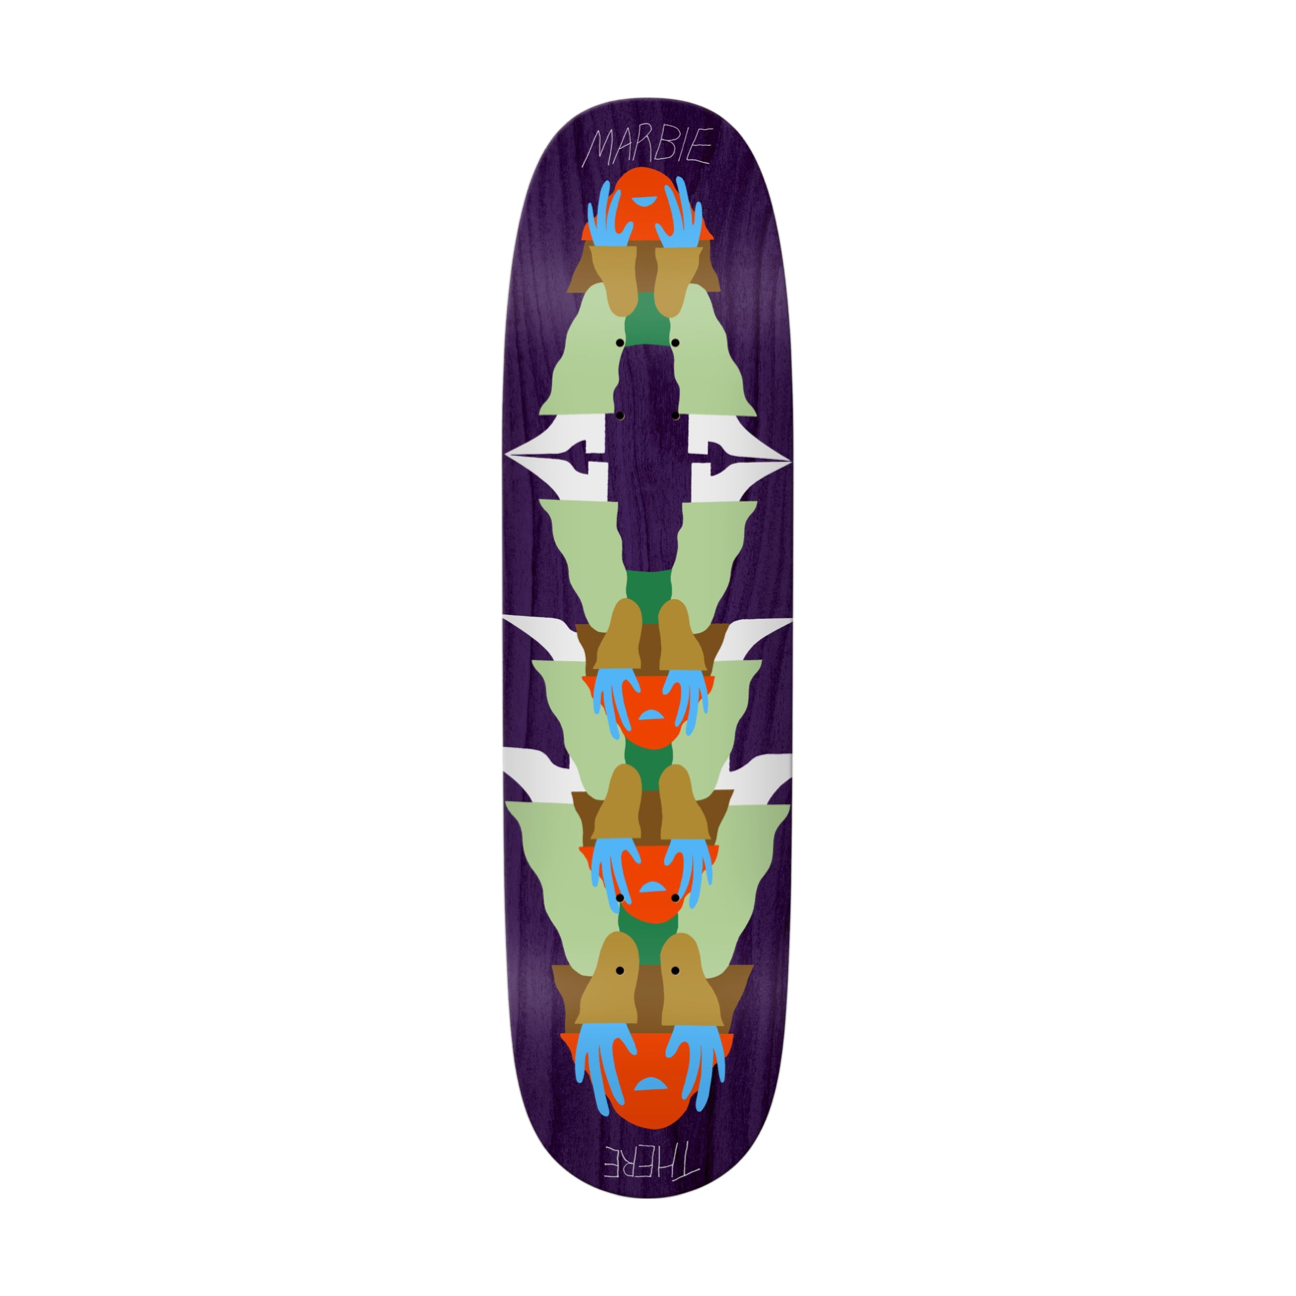 THERE - MARBIE REFLECT DECK - 8.5"